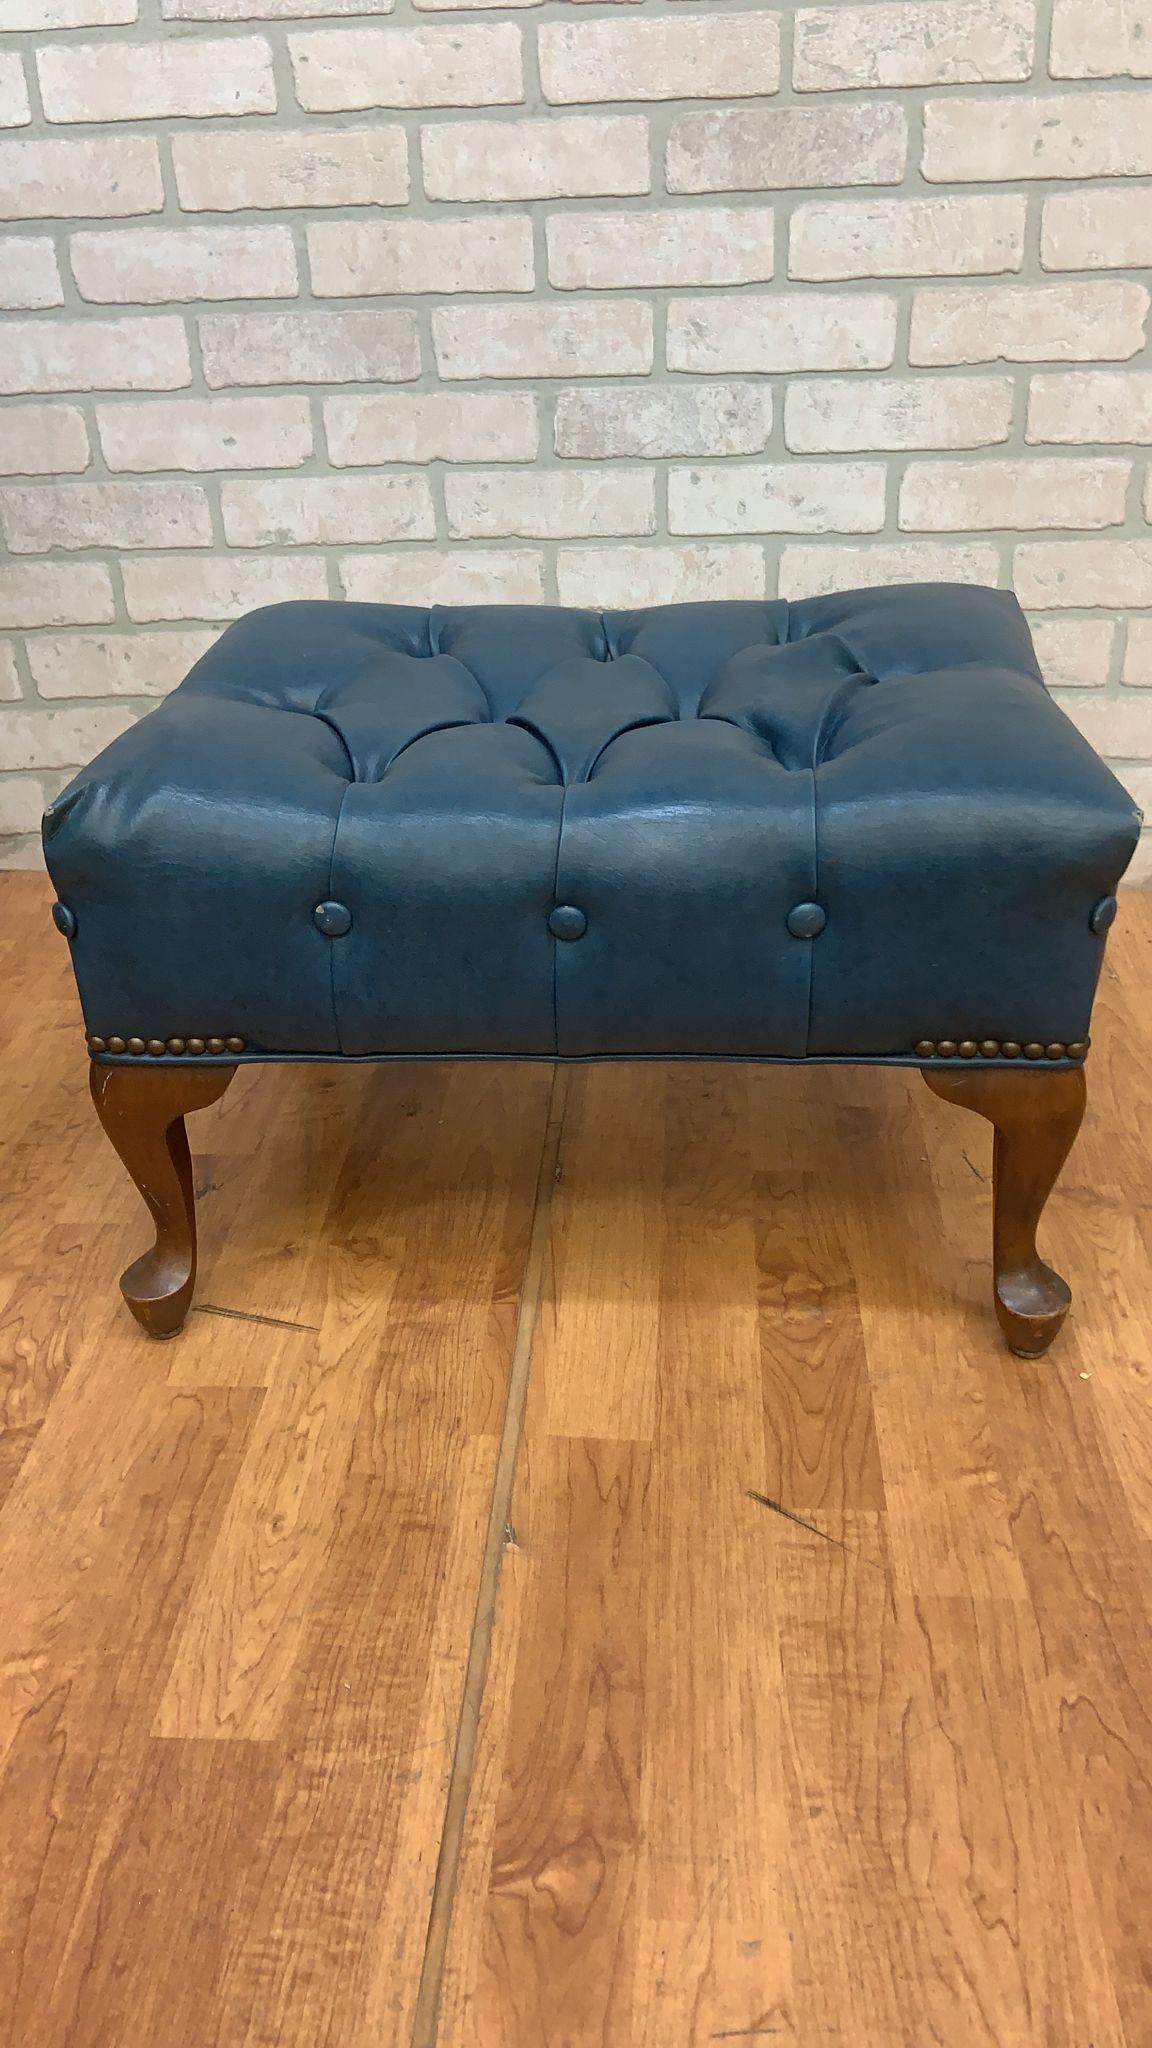 Vintage Sleepy Hollow Blue Tufted Chair and Ottoman - 2 Piece Set 4